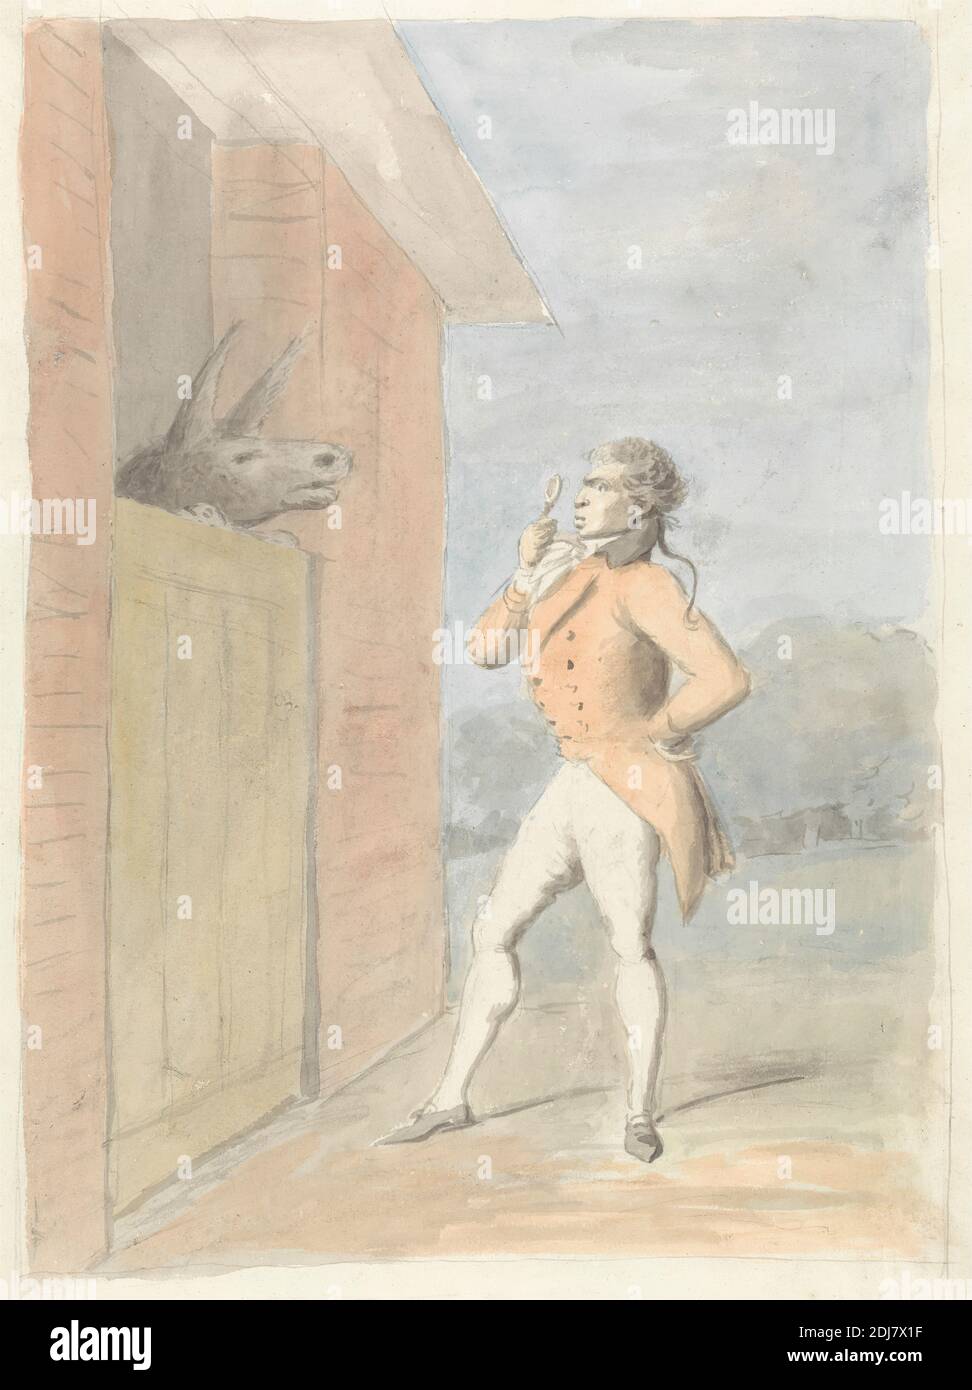 A Dandy Quizzing a Mule's Head seen over a Stable Door, George Dance RA, 1741–1825, British, after 1797, Watercolor, gray wash, and graphite on moderately thick, slightly textured, cream wove paper, Sheet: 15 1/8 x 11 1/4 inches (38.4 x 28.6 cm), genre subject, man, mule, stable Stock Photo